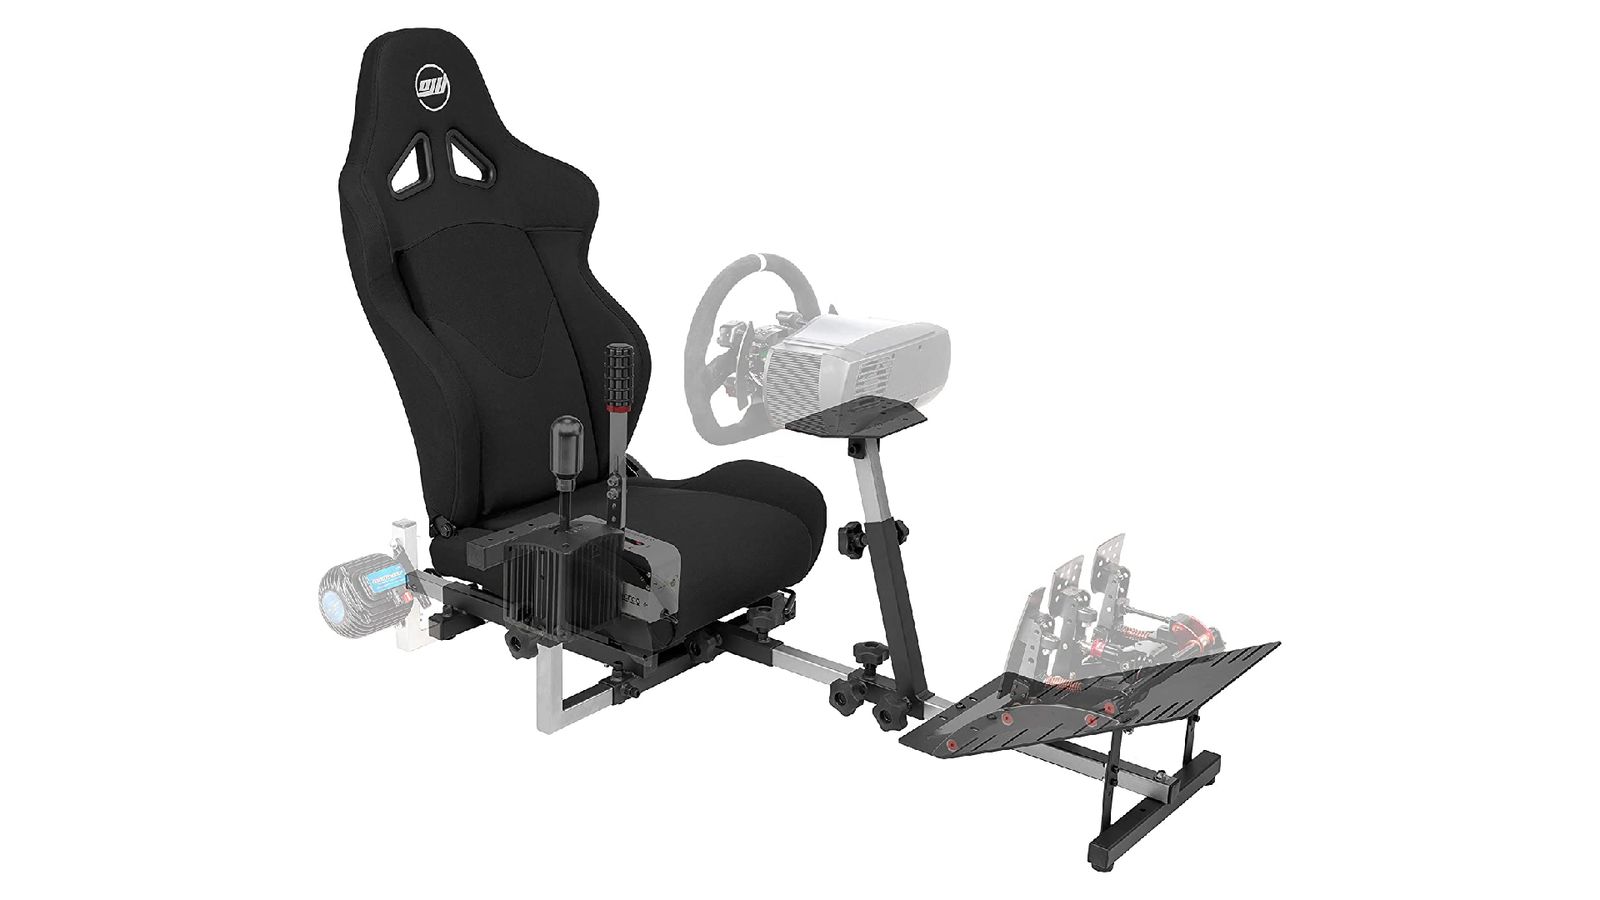 OpenWheeler GEN3 product image of a black racing chair featuring a metal wheel stand and pedal.